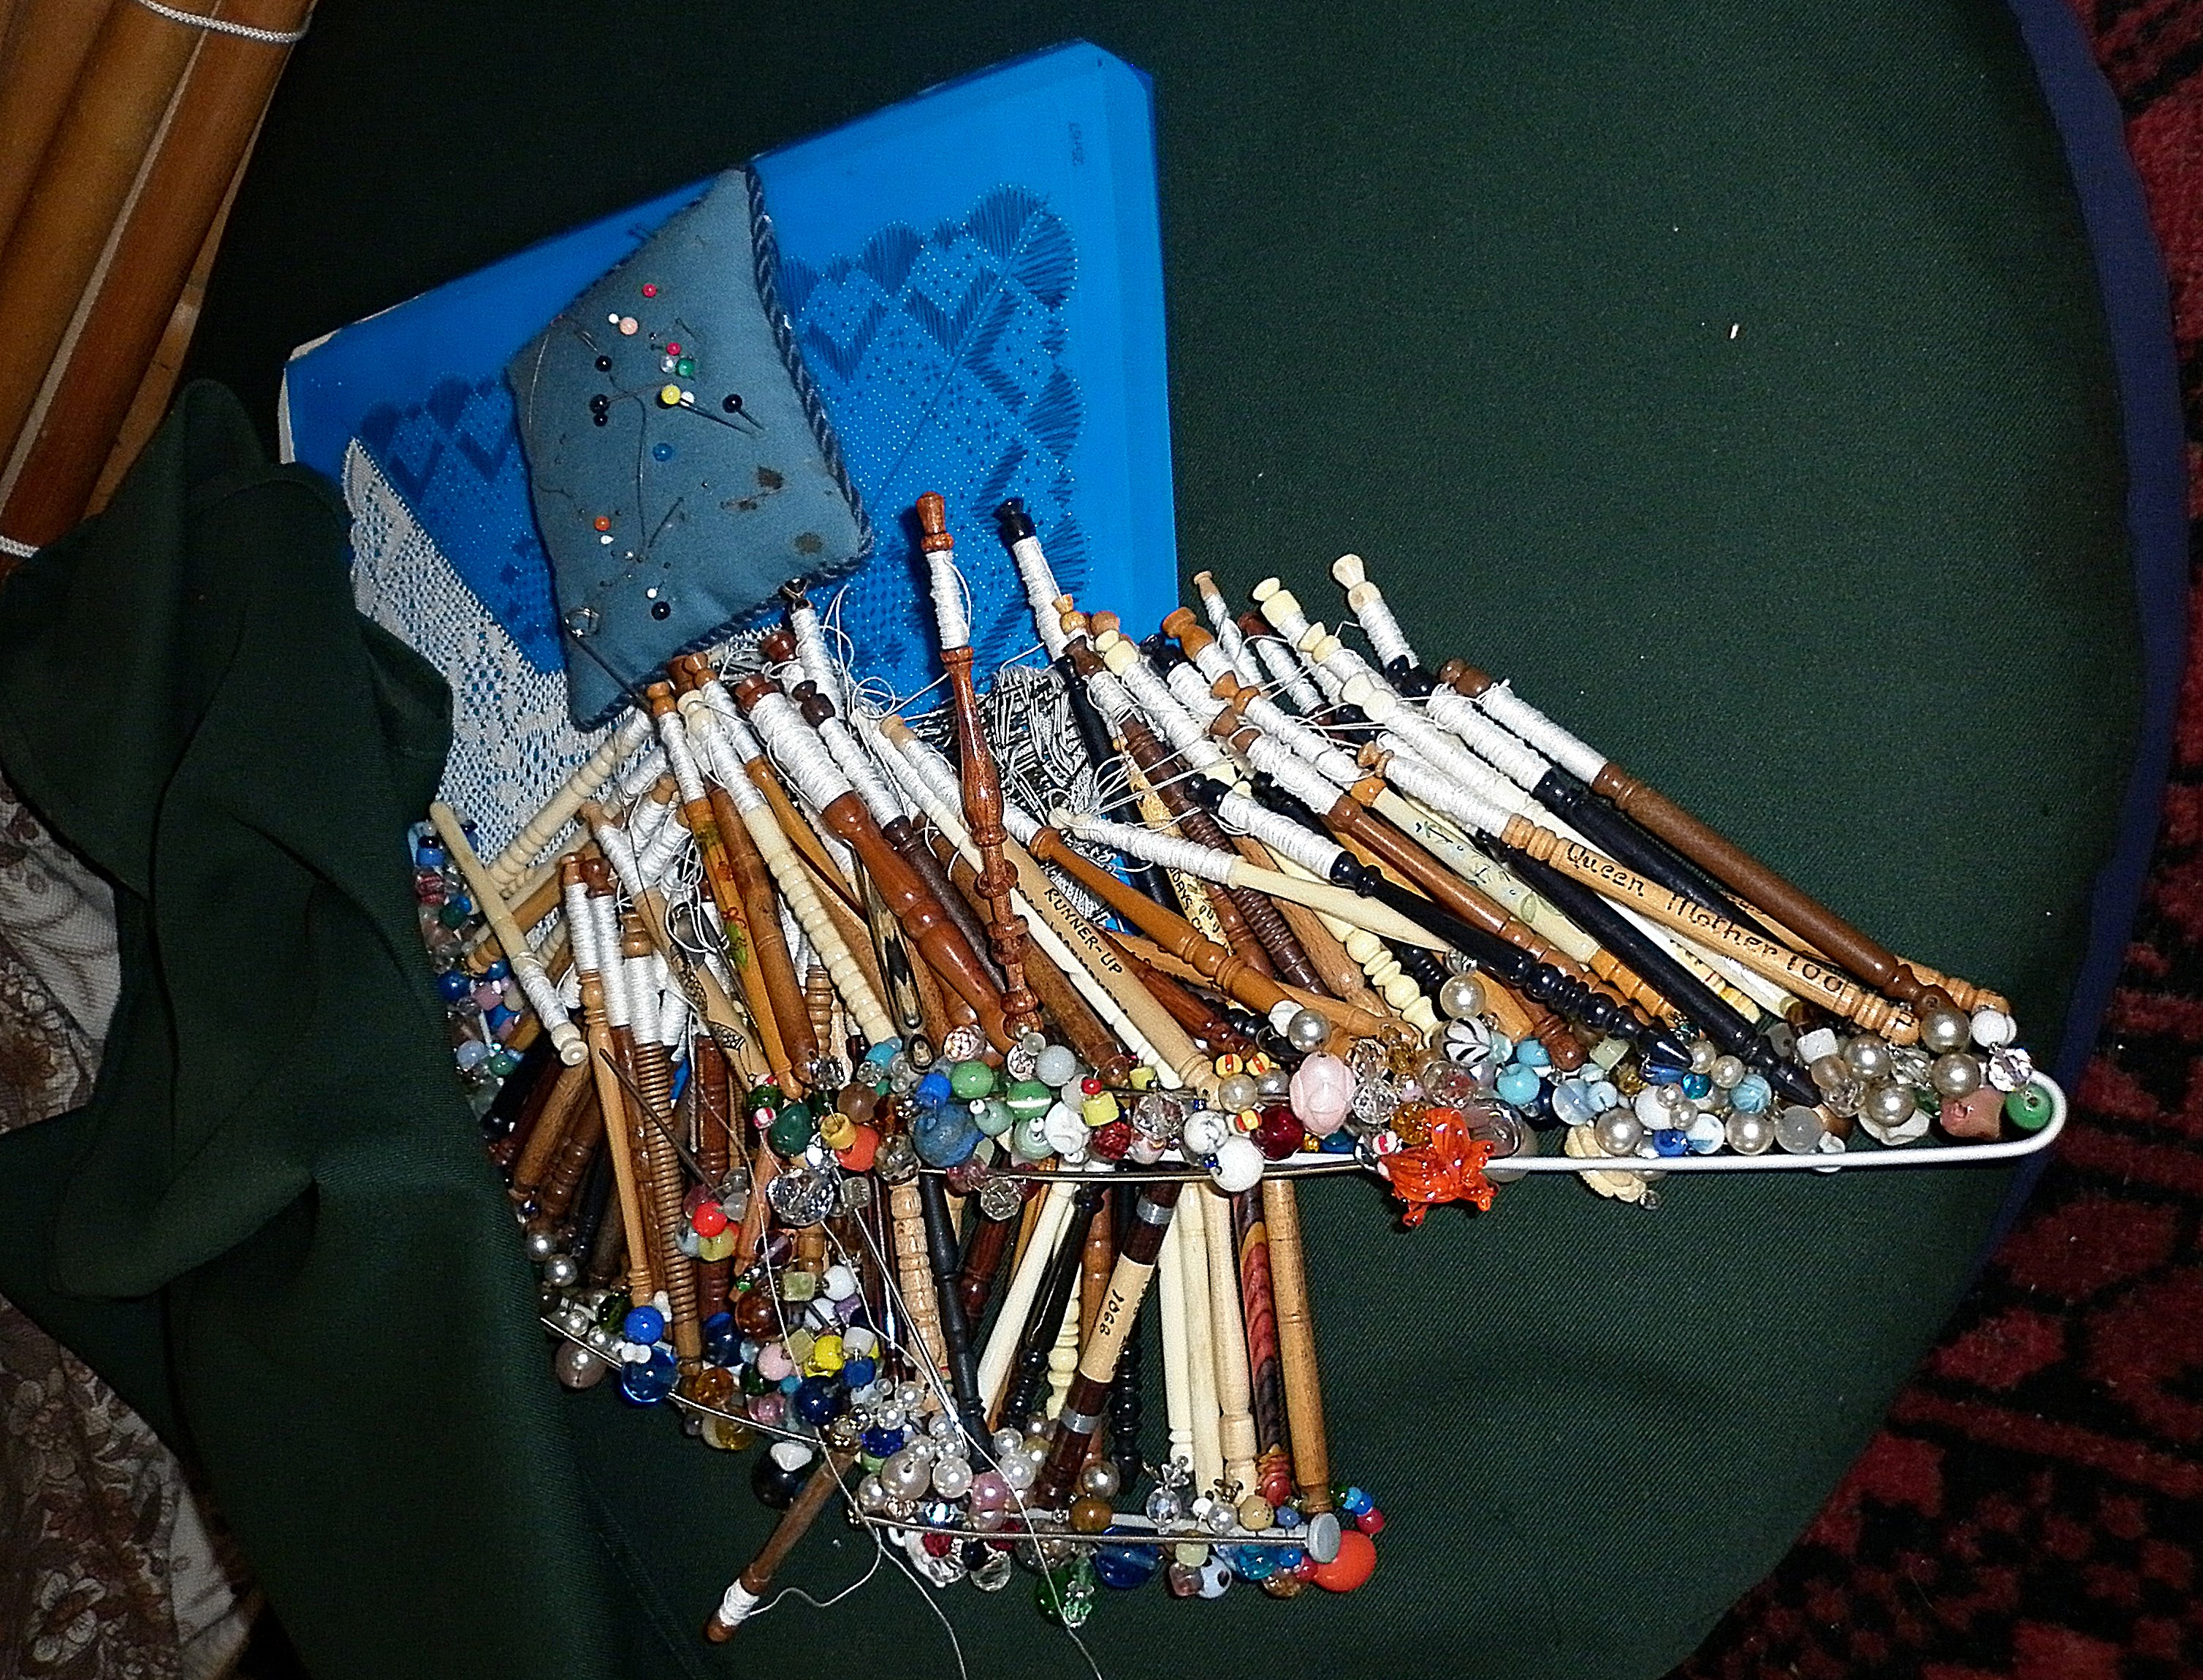 Large quantity of lacemaking accessories, inc. bobbins, cottons, patterns, materials and pillows - Image 2 of 3